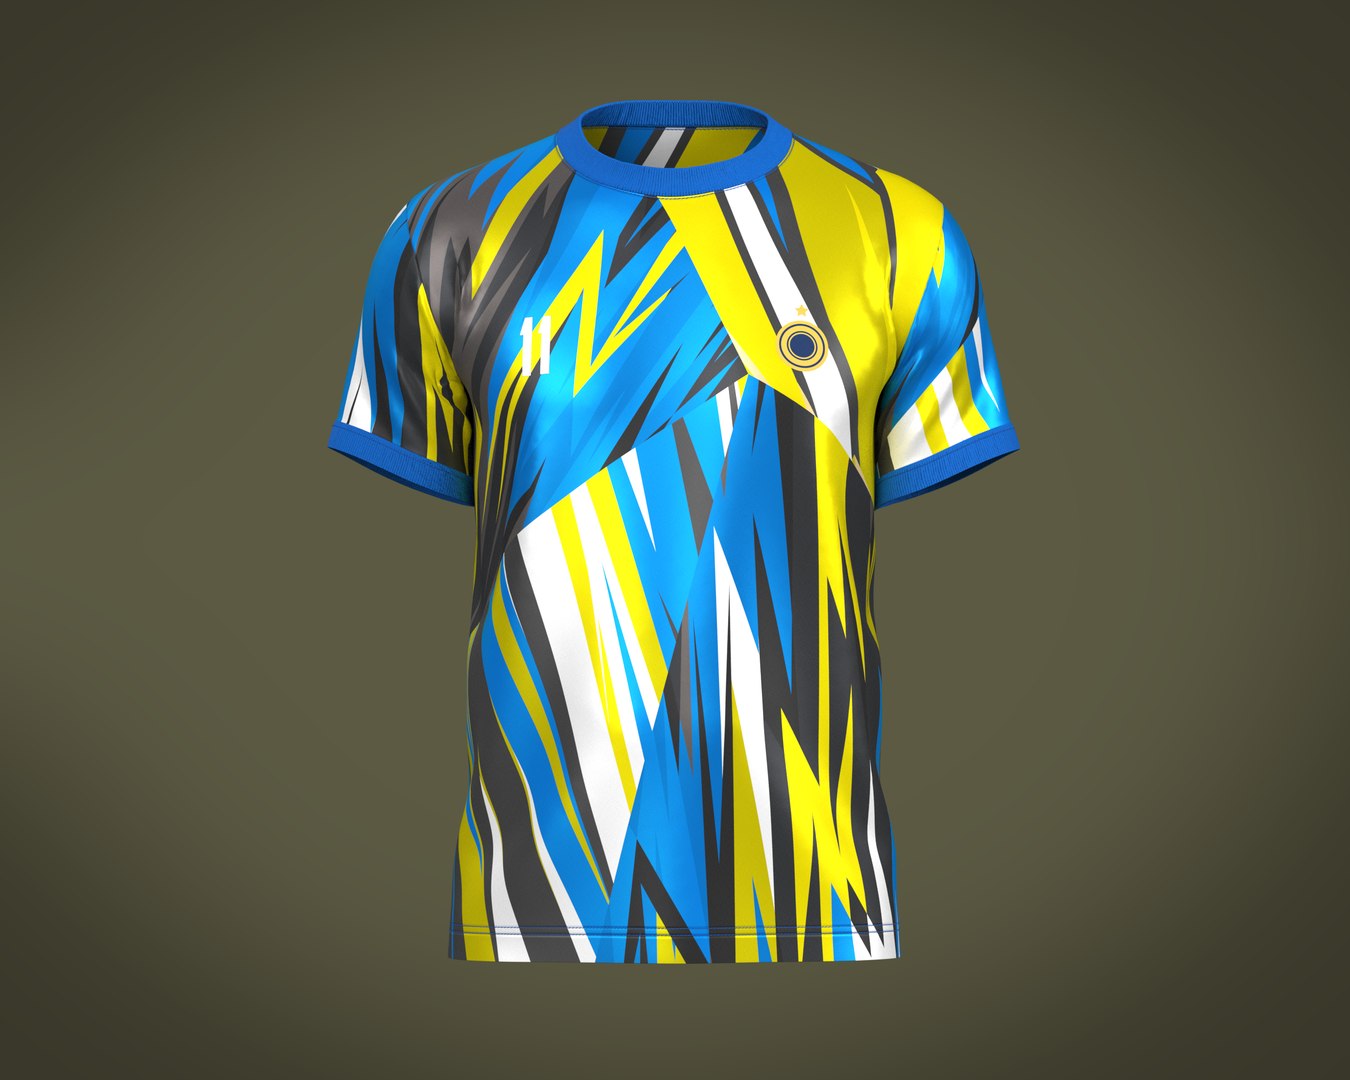 Soccer Football Mustard Yellow With Blue Jersey Player-11 model -  TurboSquid 2038633